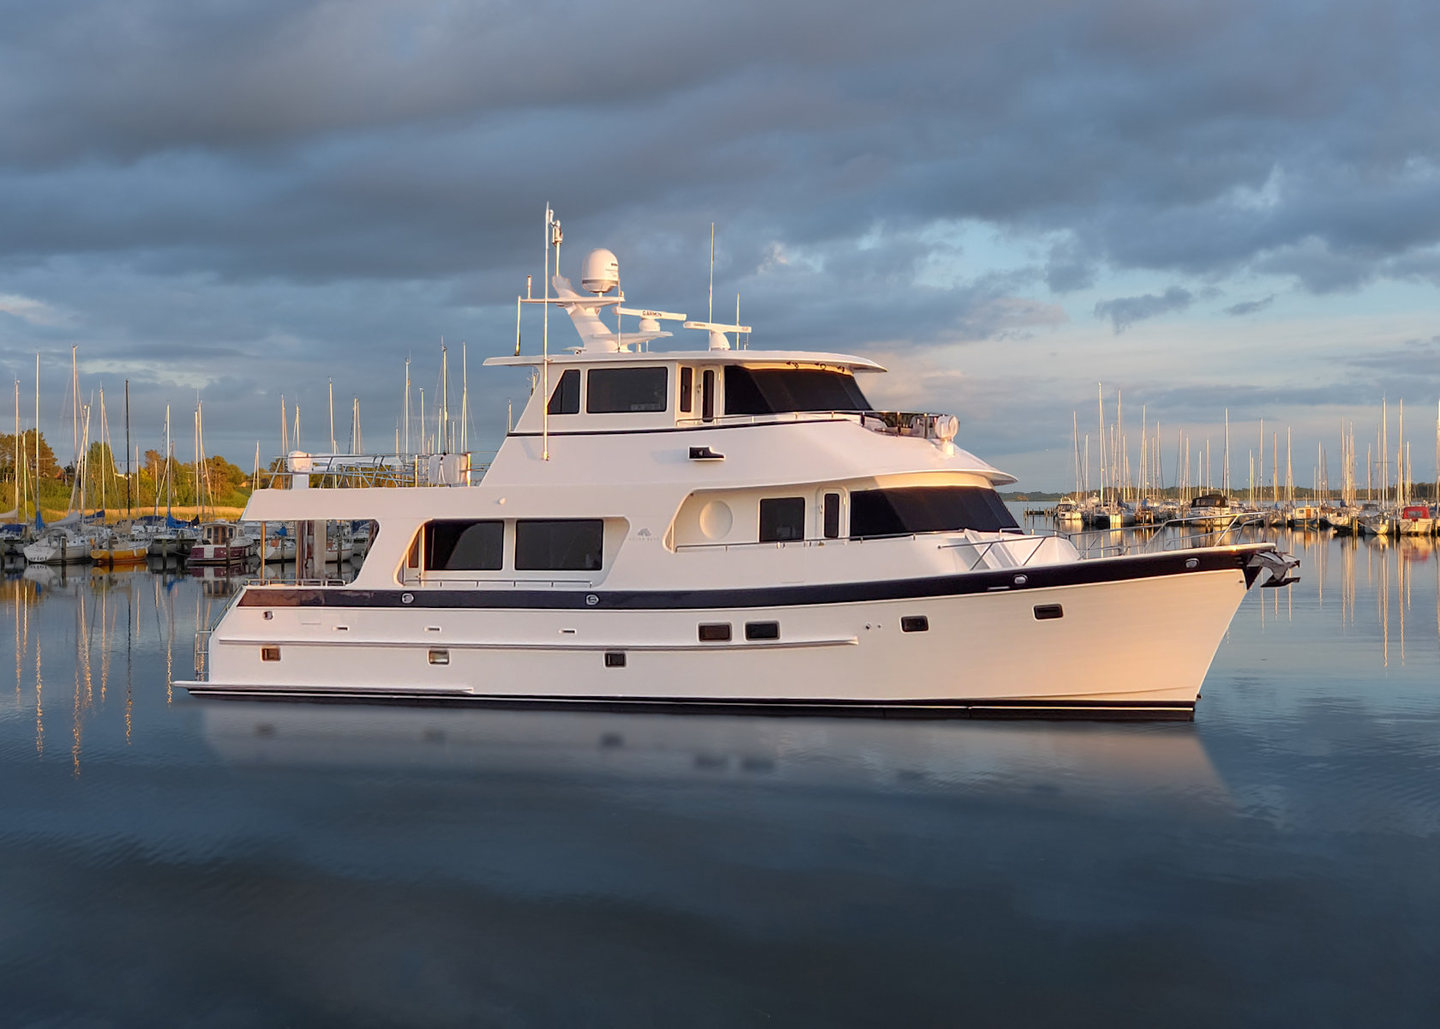 360 VR Virtual Tours of the Outer Reef 720 DeluxBridge Motoryacht